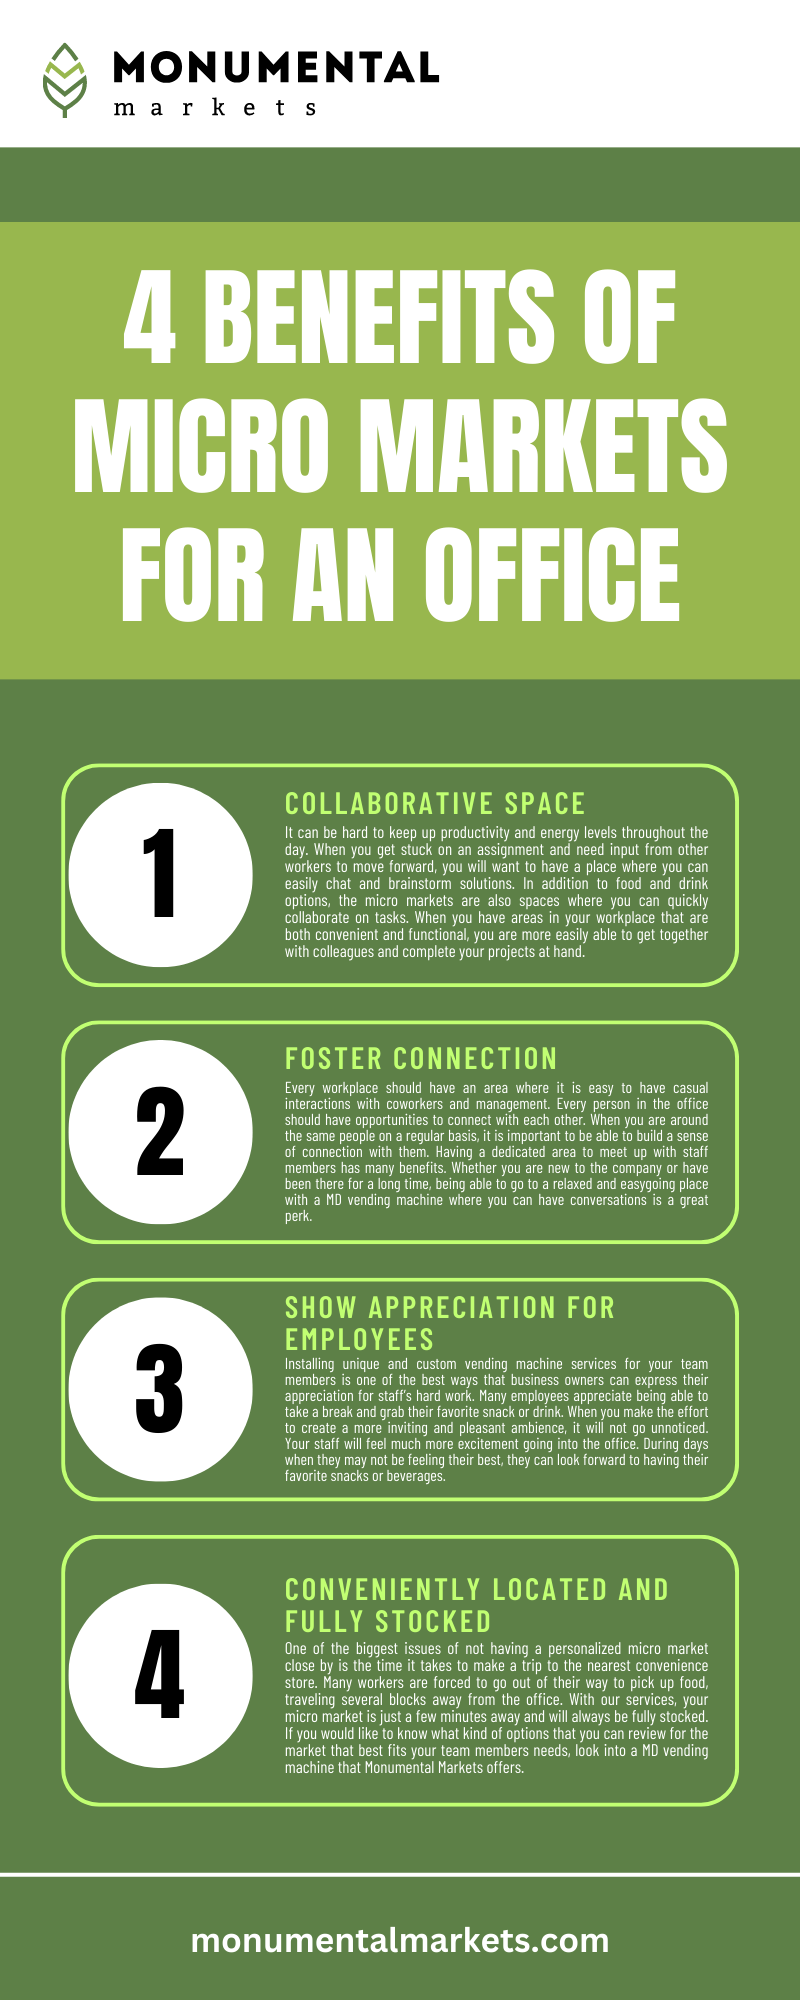 4 Benefits Of Micro Markets For An Office Infographic